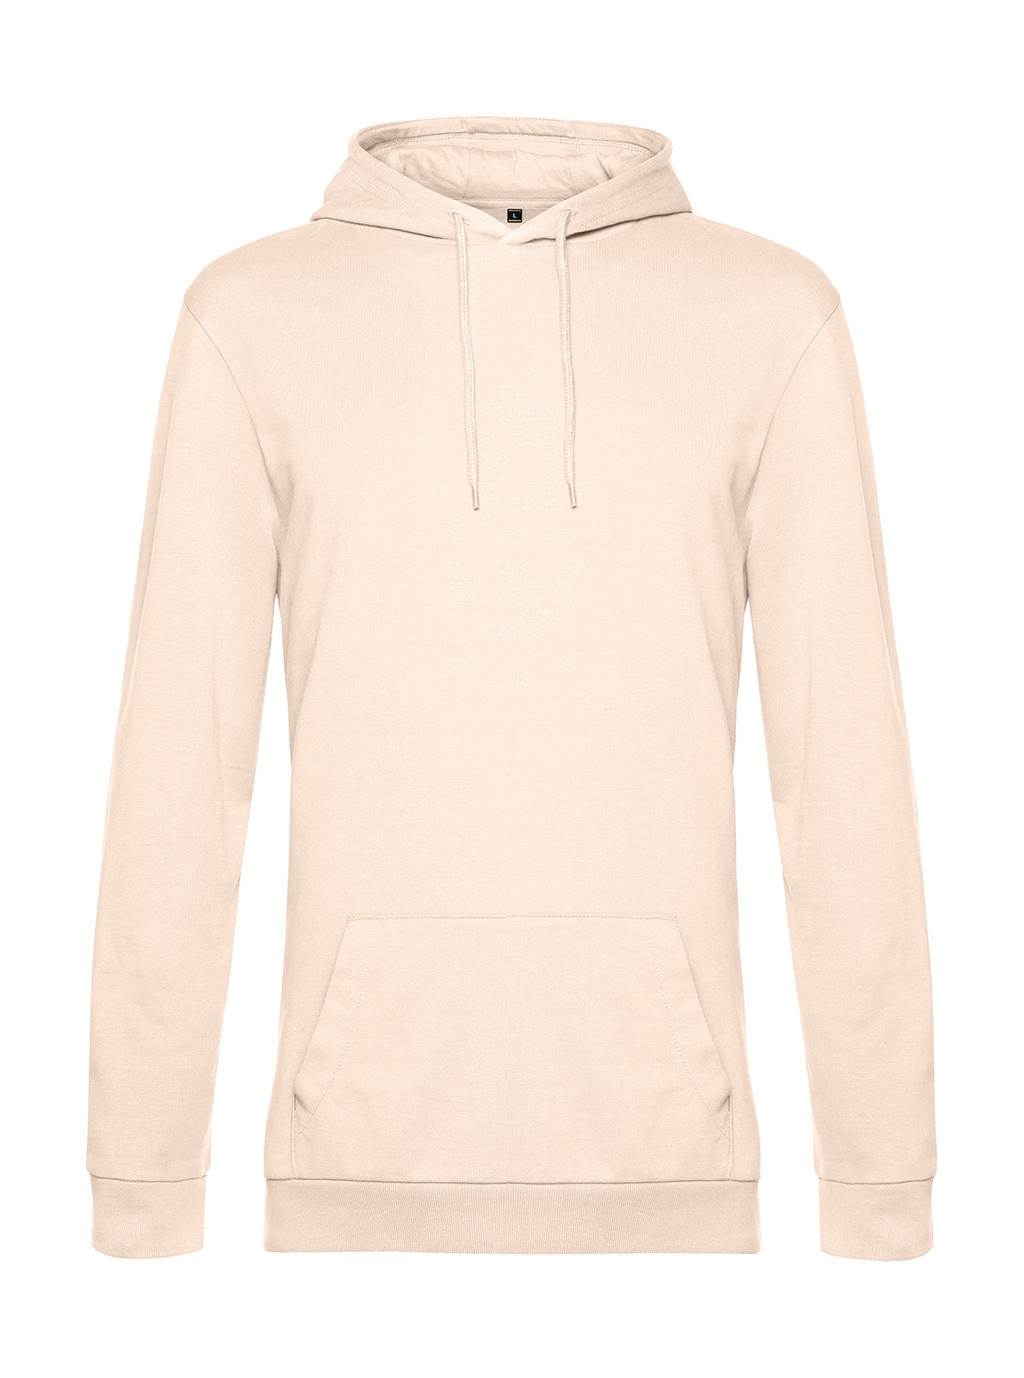 Mikina s kapucňou #Hoodie French Terry - pale pink